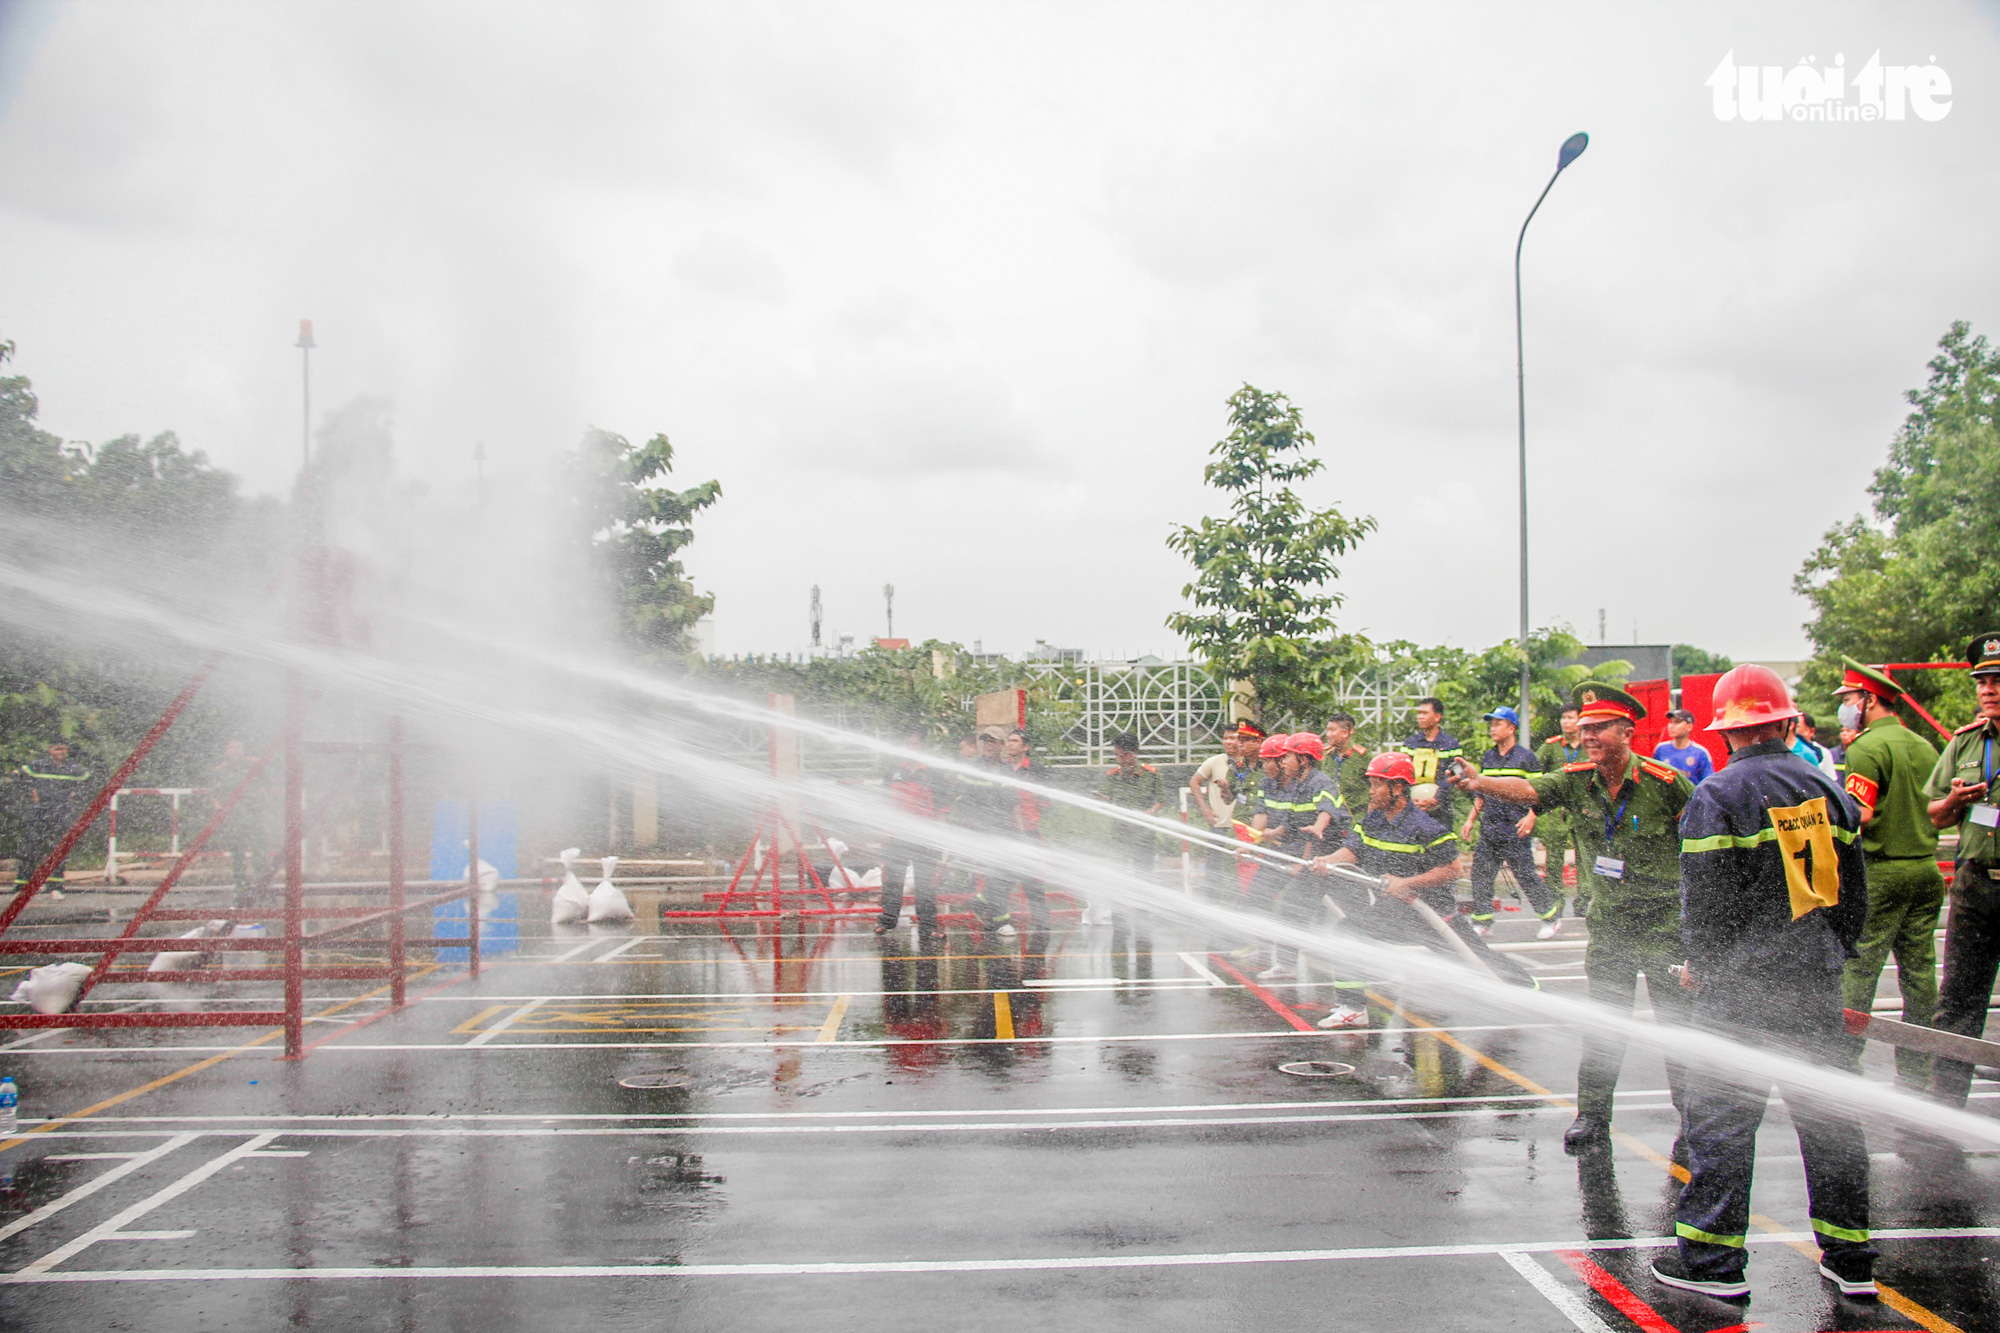 Firefighters use water hoses to put out fire during a firefighting and rescue competition in Ho Chi Minh City, June 16, 2020. Photo: Chau Tuan / Tuoi Tre